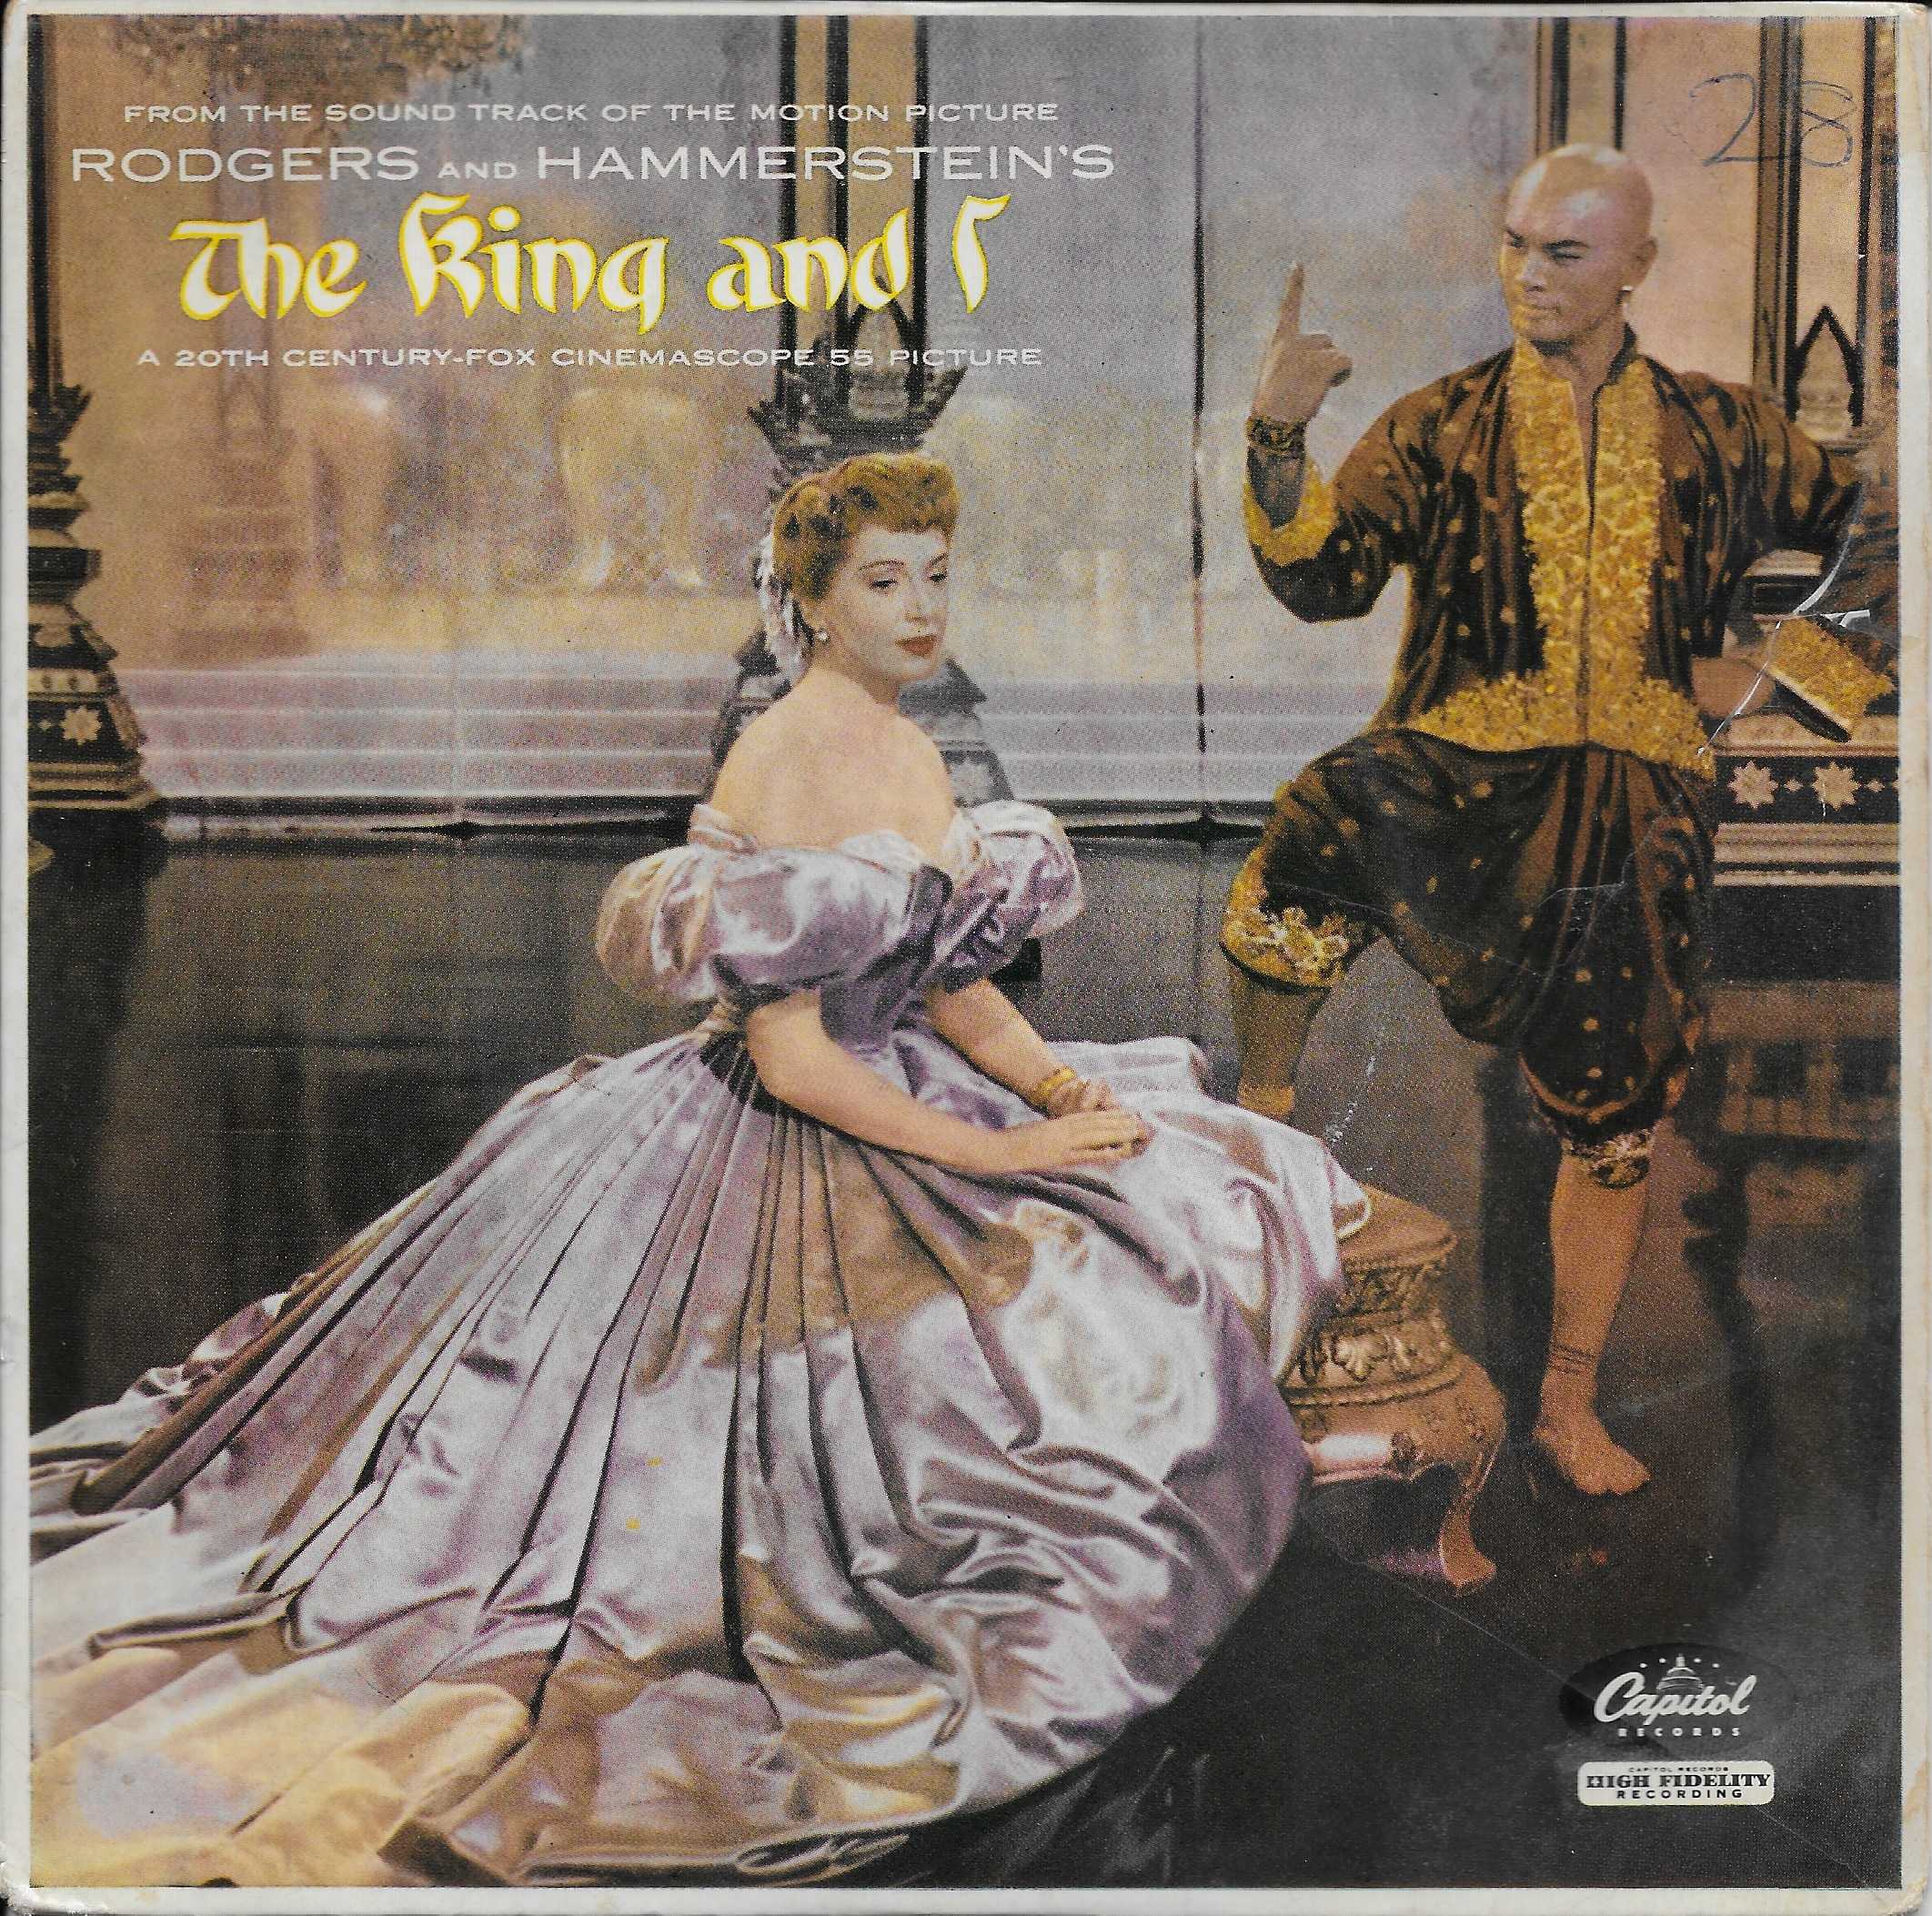 Picture of EAP 2-740 The King and I 2 by artist Rodgers / Hammerstein II from ITV, Channel 4 and Channel 5 singles library